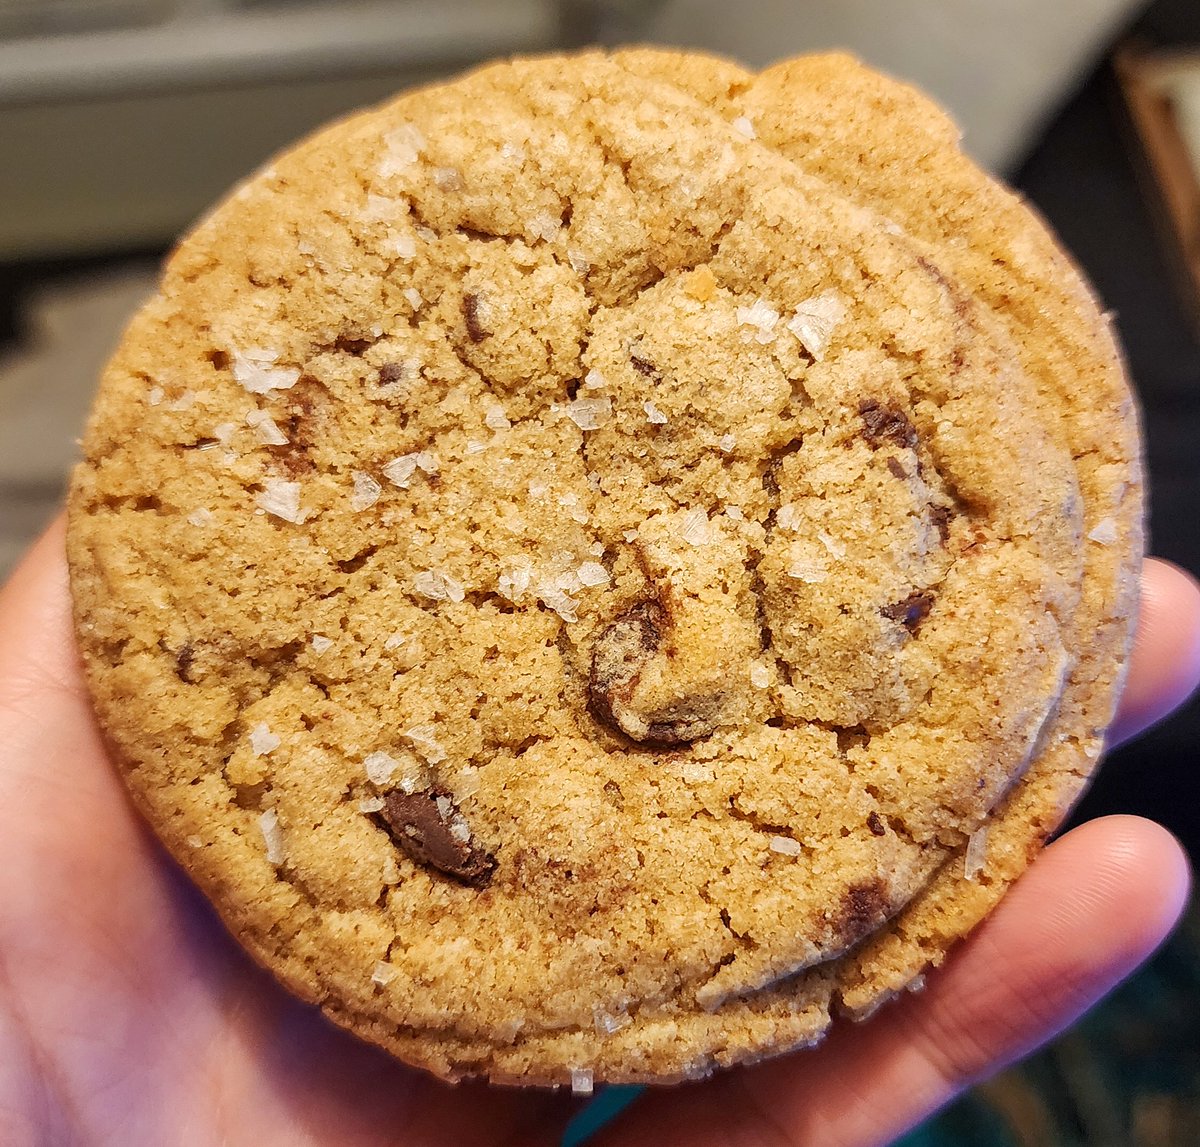 C is for cookie. 
That's good enough for me. 
#plantbased #GlutenFree